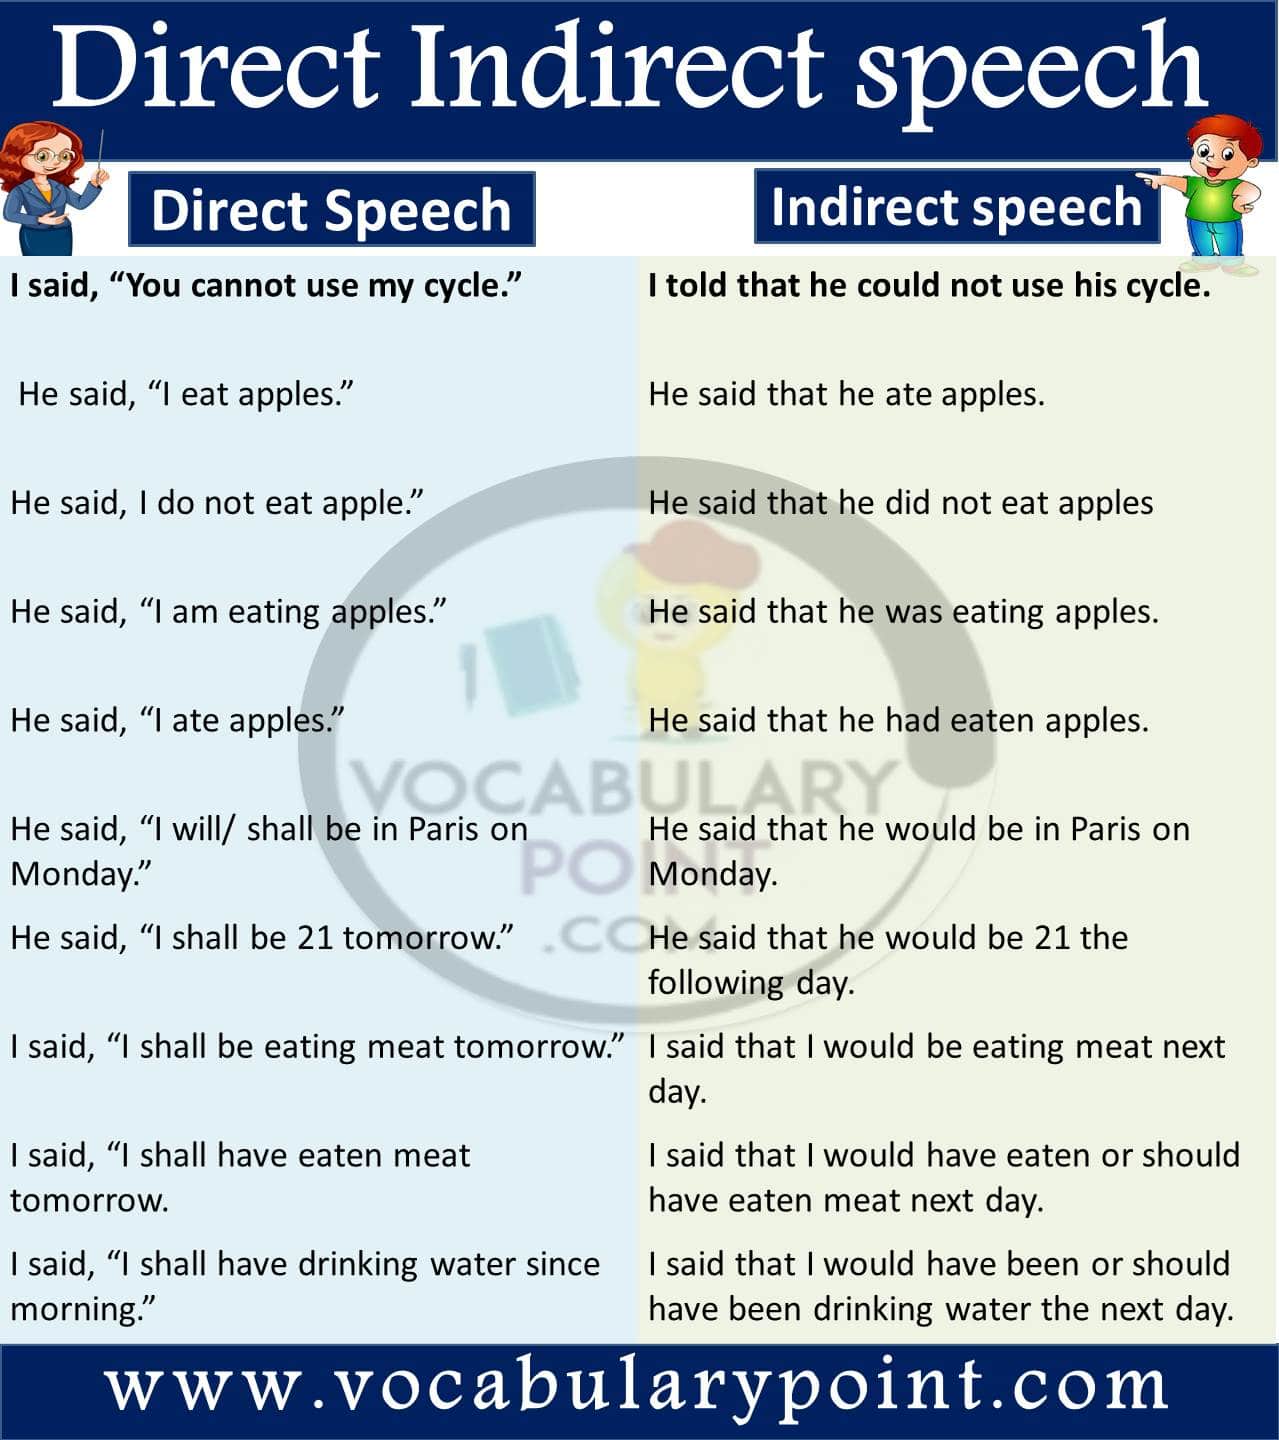 Direct Indirect speech| 50+examples of direct and indirect speech pdf